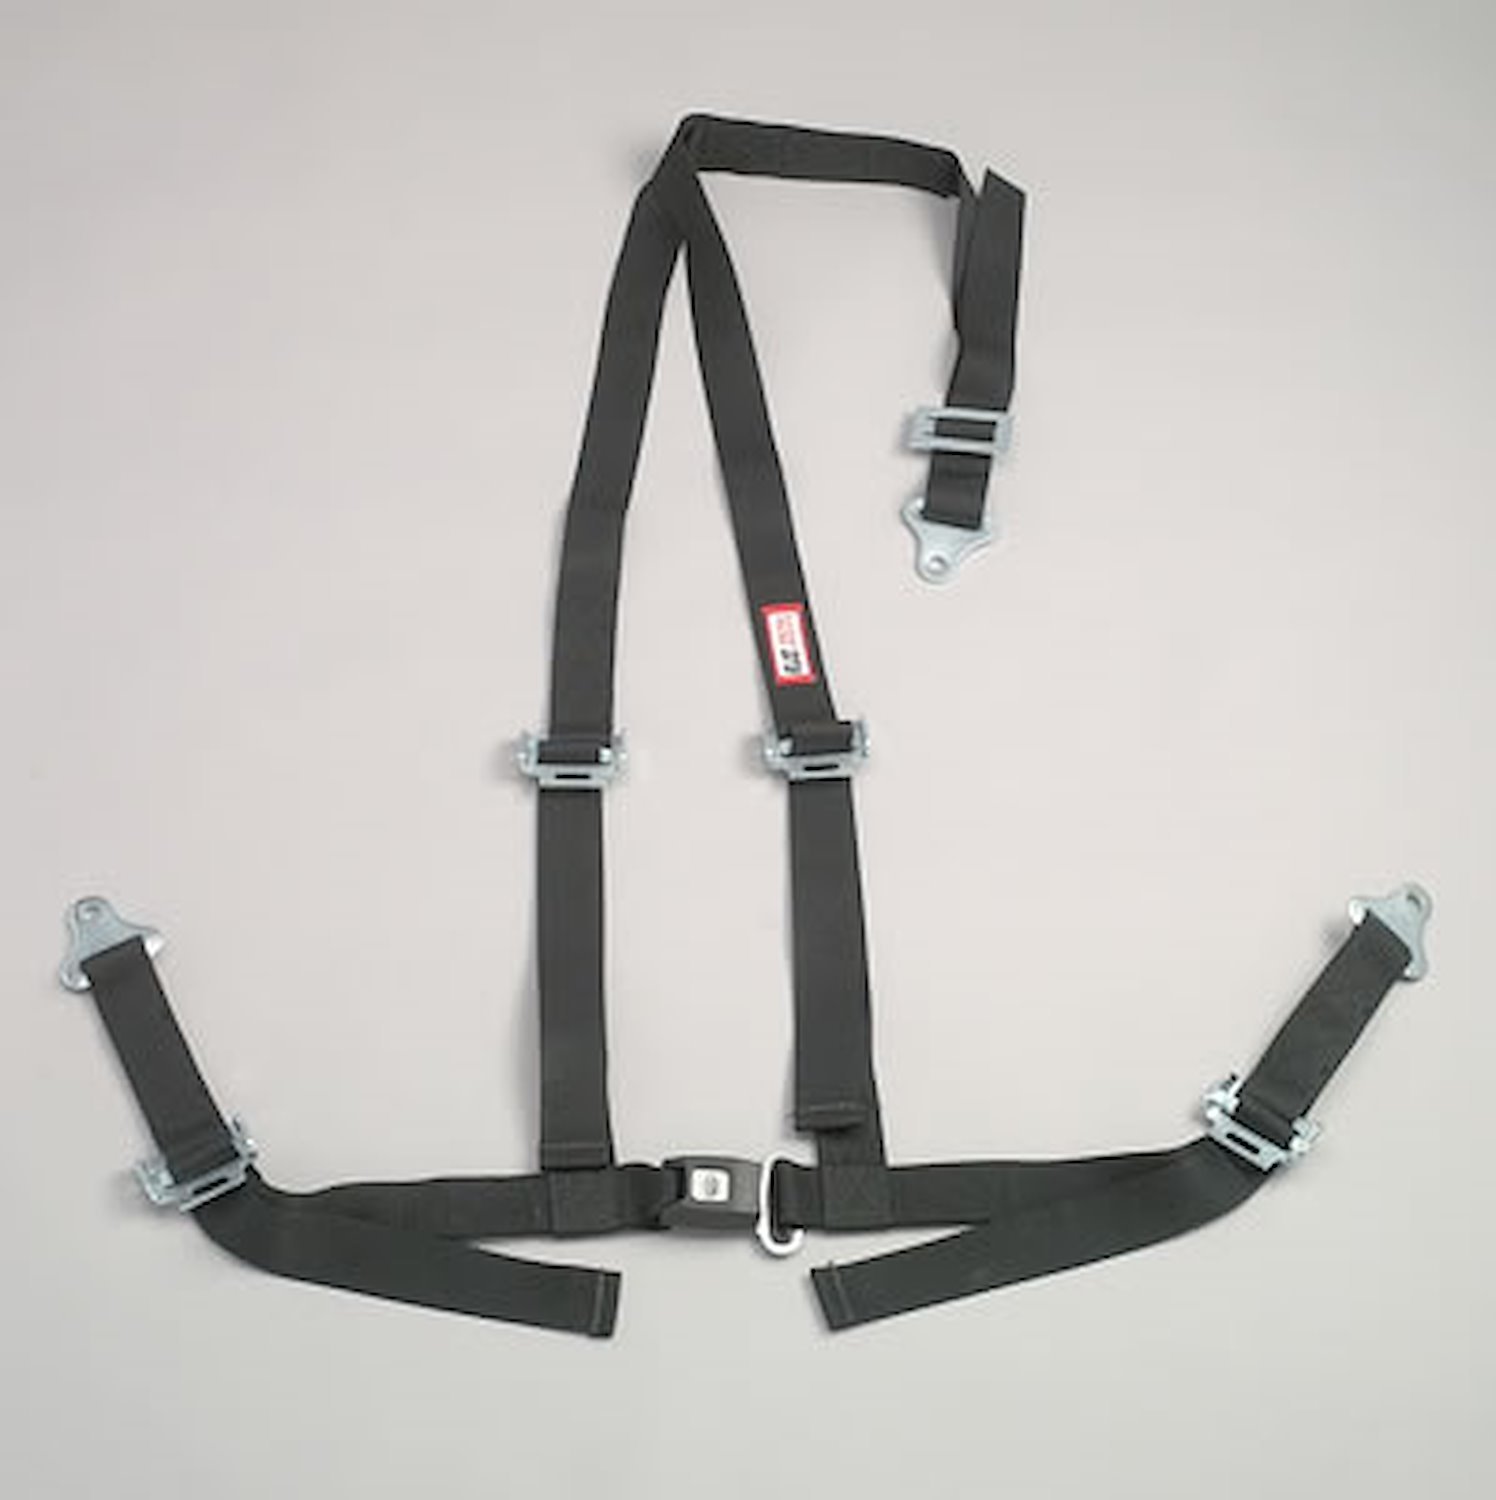 NON-SFI B&T HARNESS 2 PULL UP Lap Belt 2 S. H. Y FLOOR Mount ALL WRAP ENDS w/STERNUM STRAP BLACK